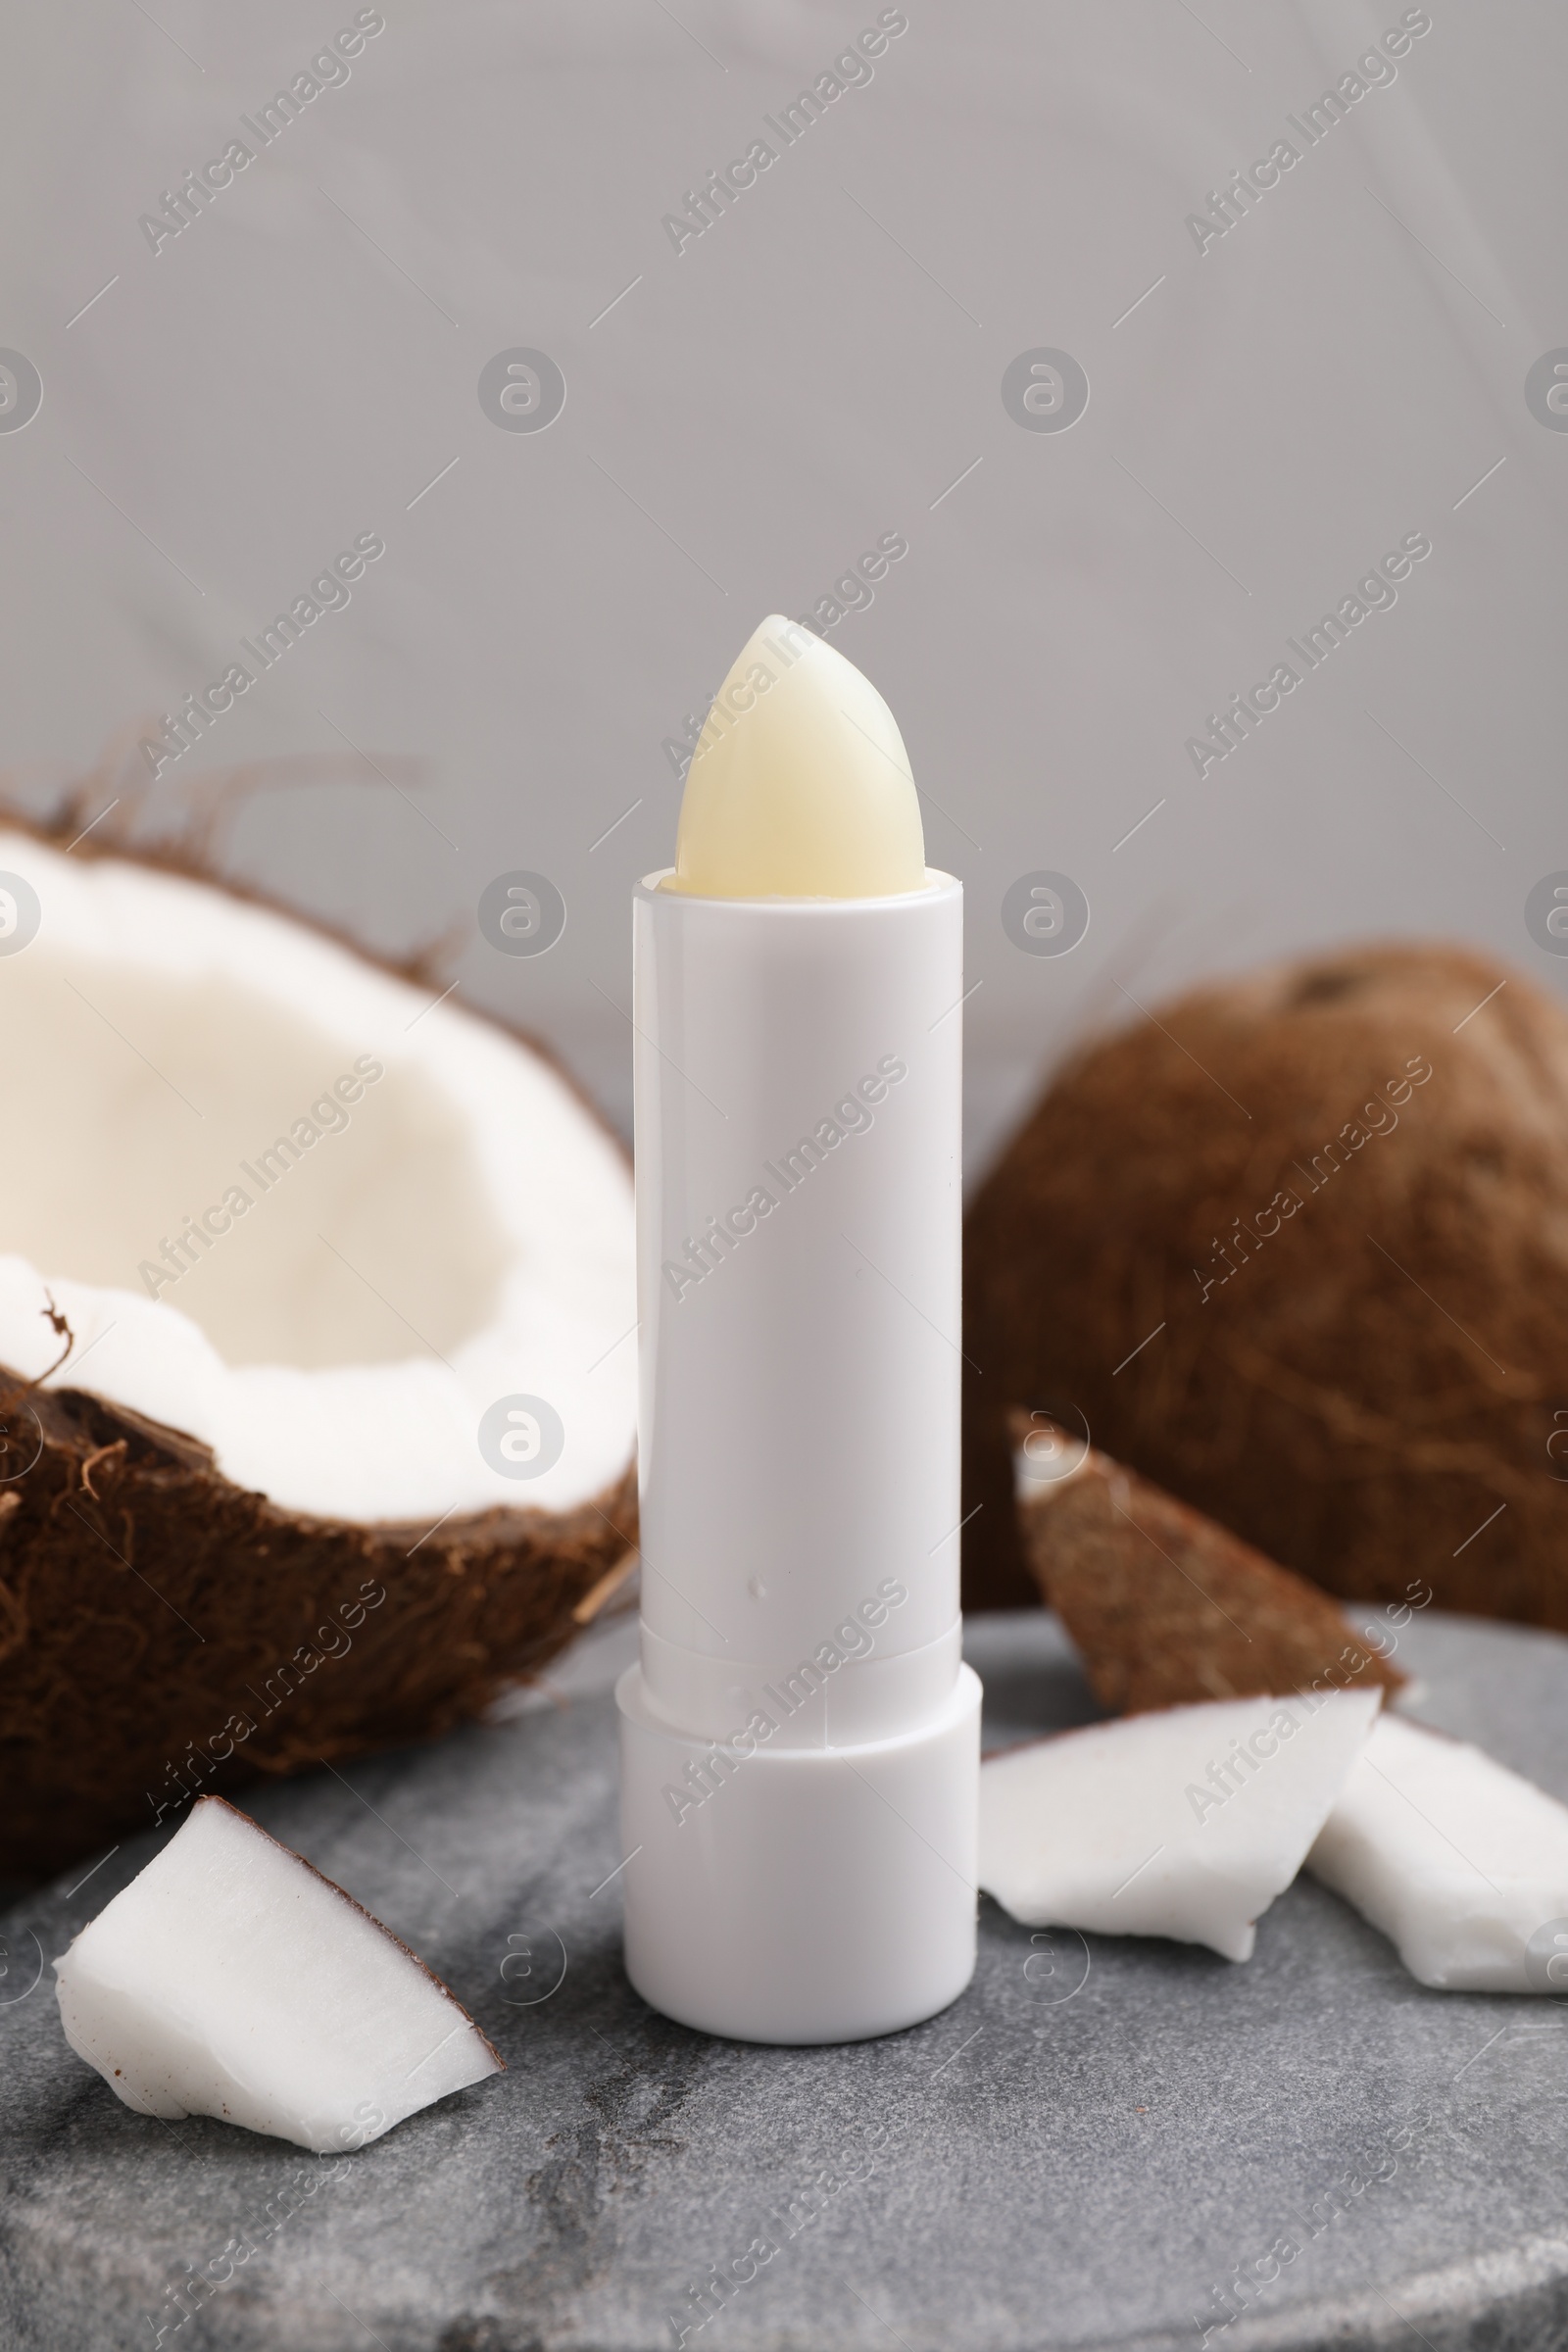 Photo of Lip balm and coconut on grey table